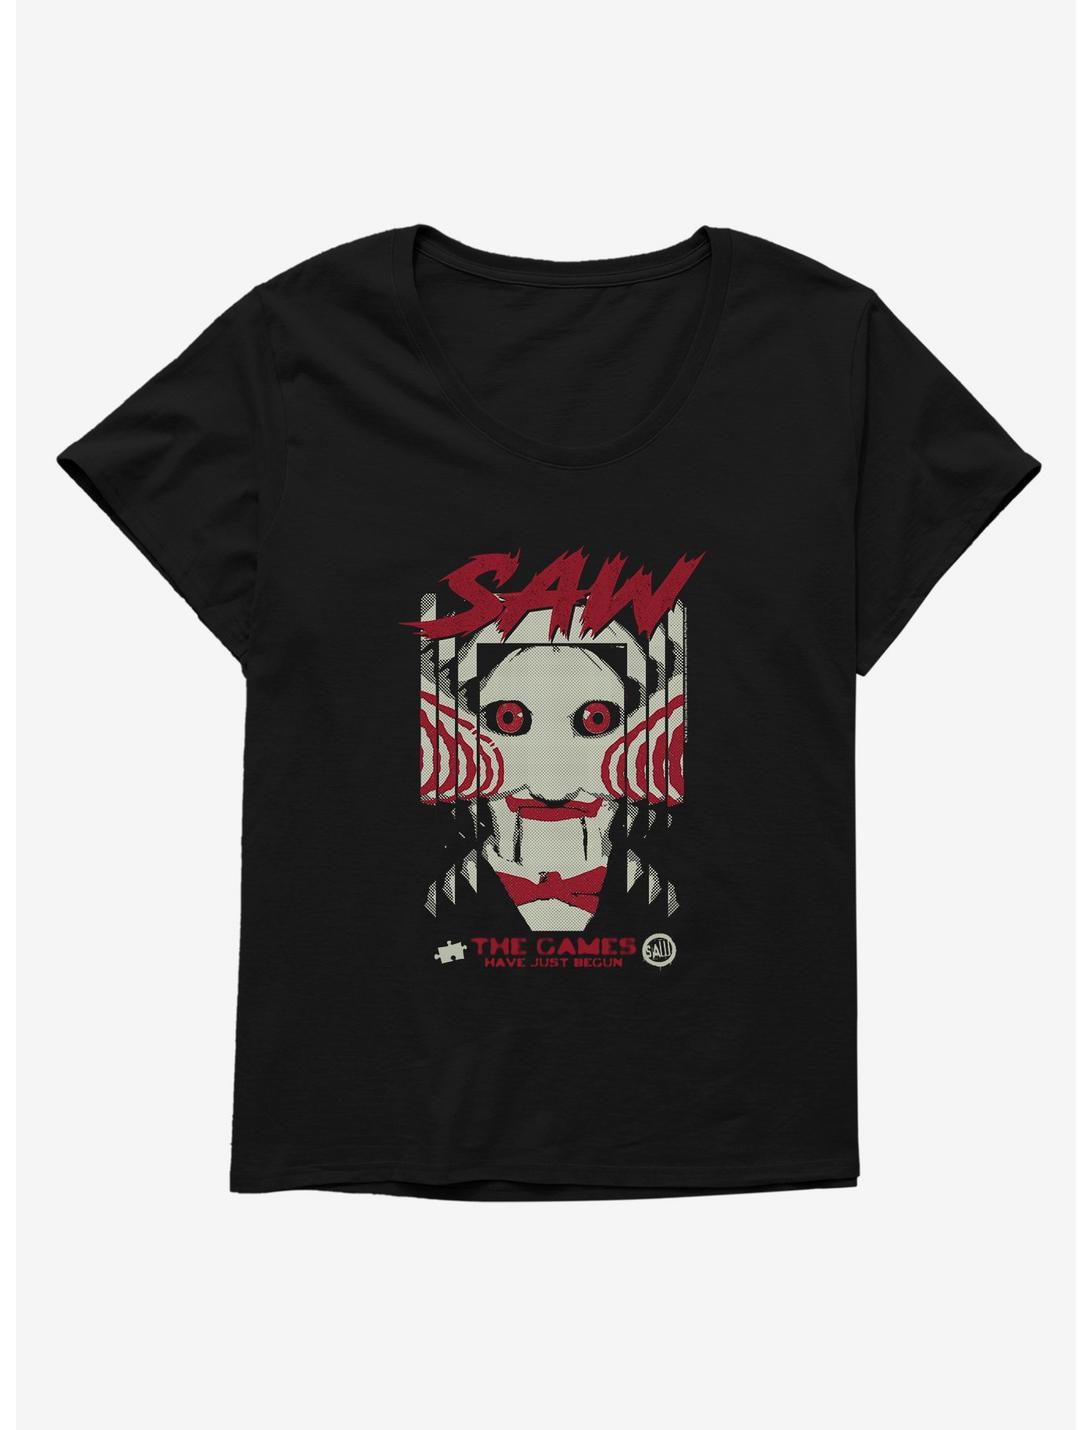 Saw The Games Have Just Begun Girls T-Shirt Plus Size, BLACK, hi-res